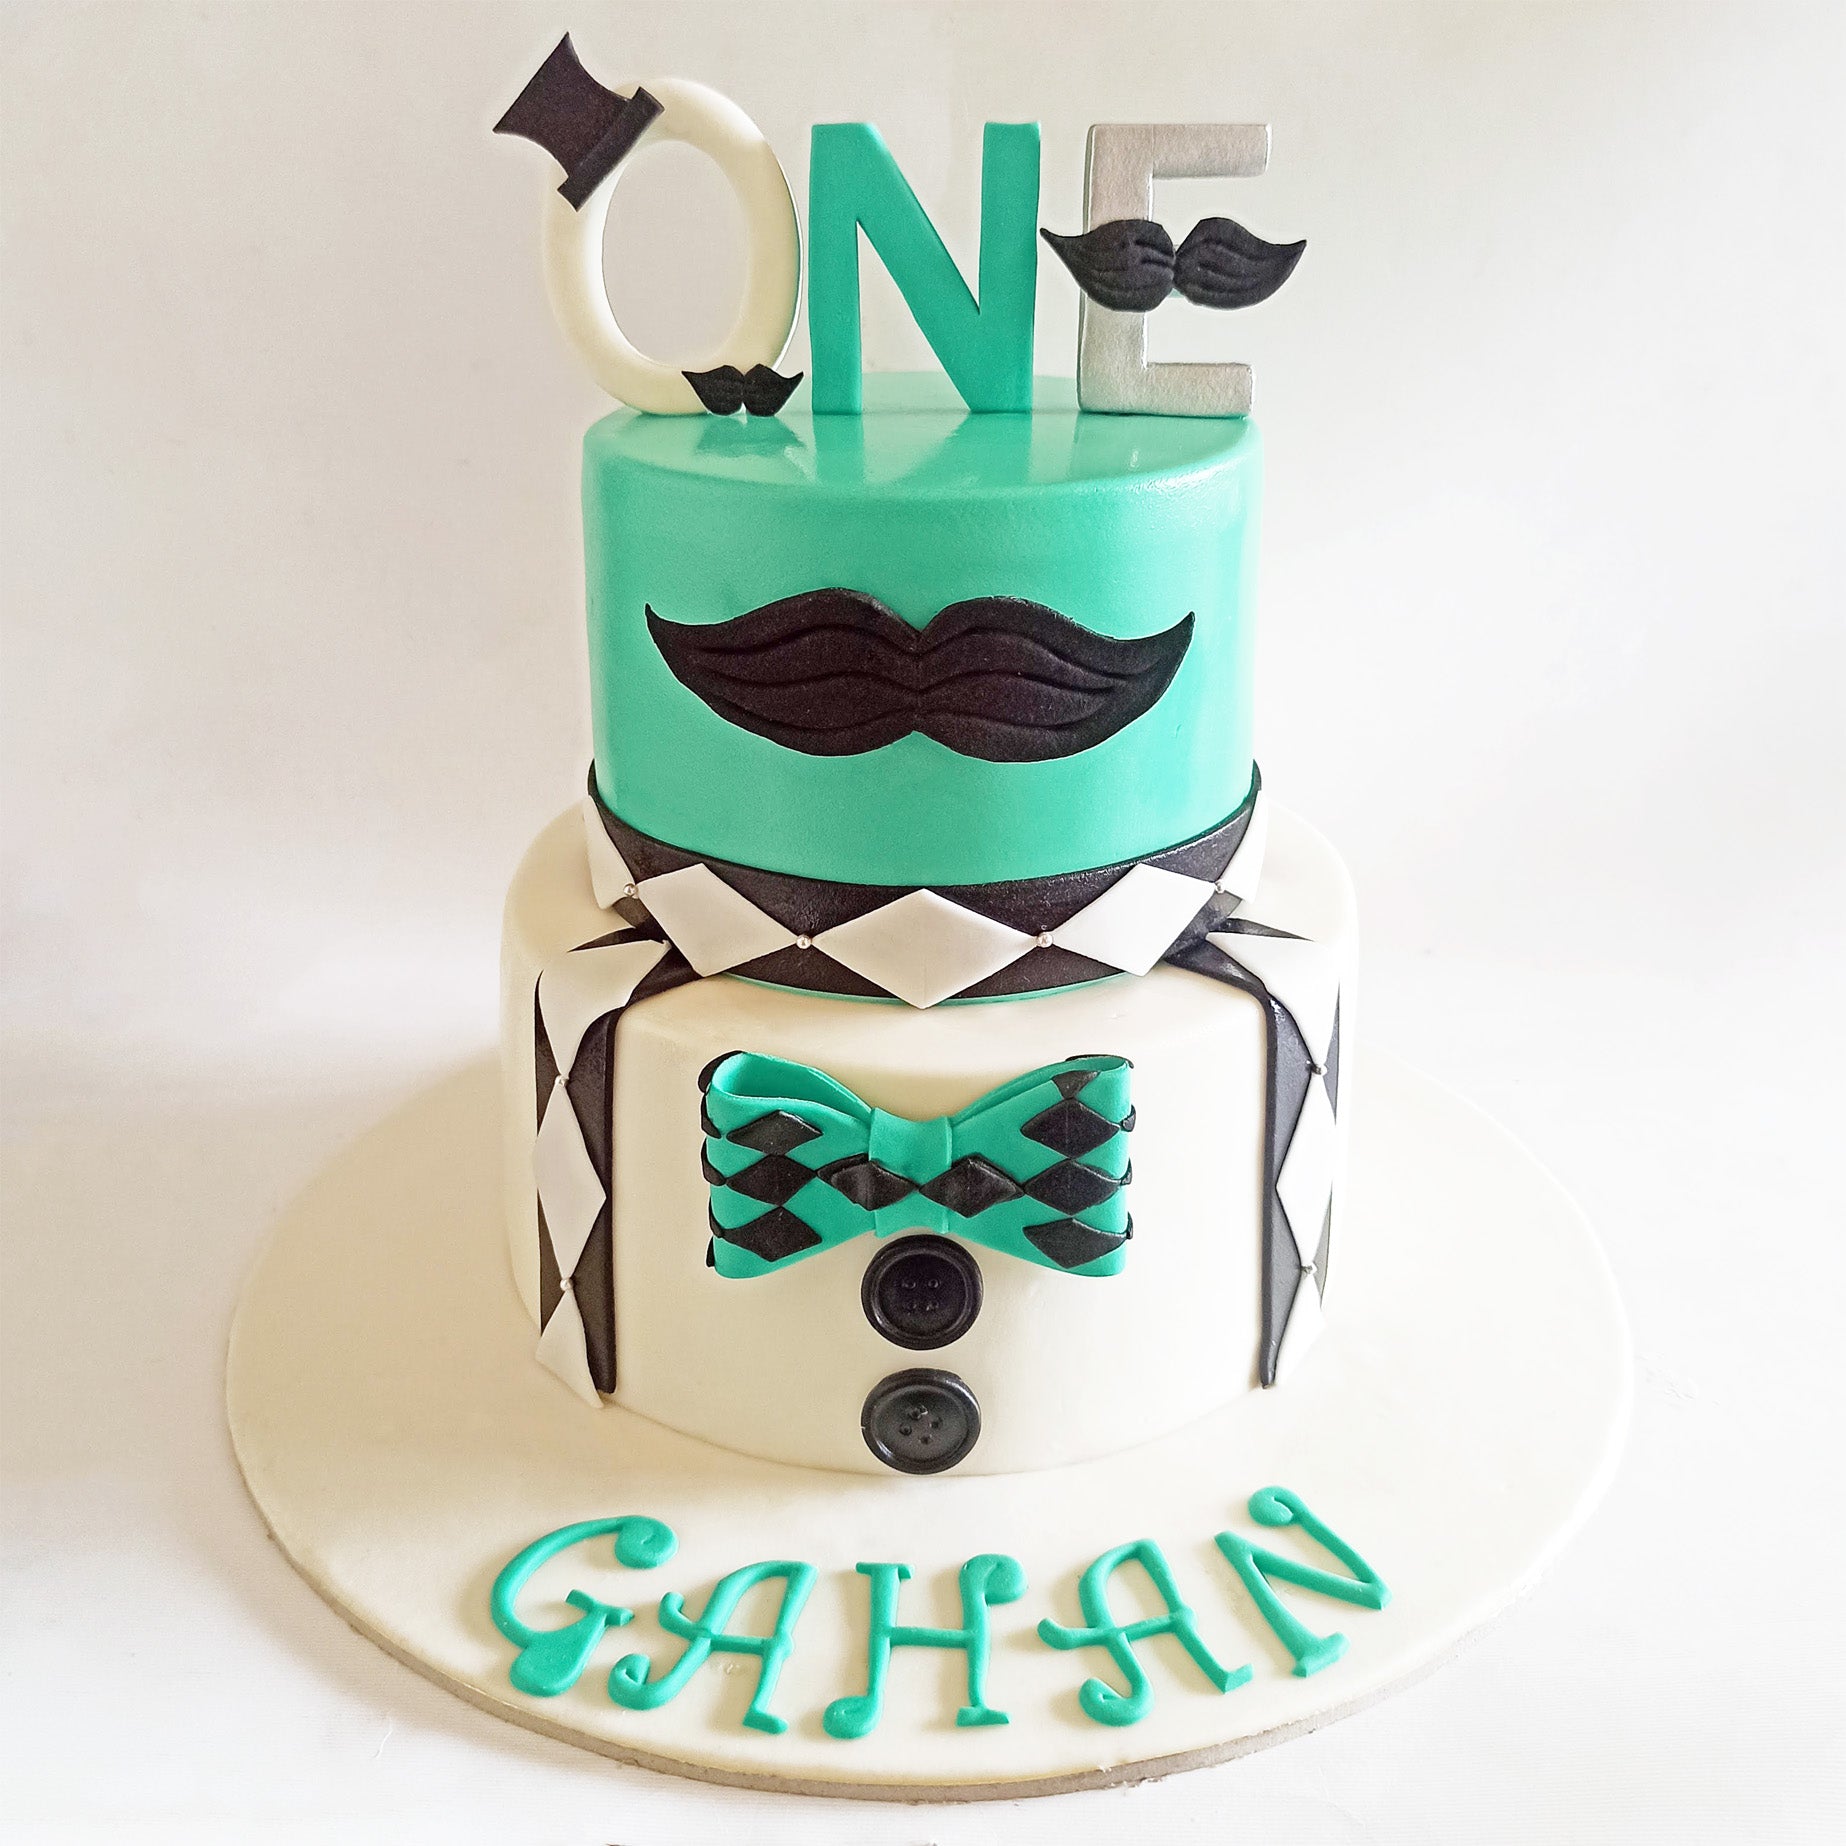 19 Of The Best Boys Birthday Cakes | Canvas Factory